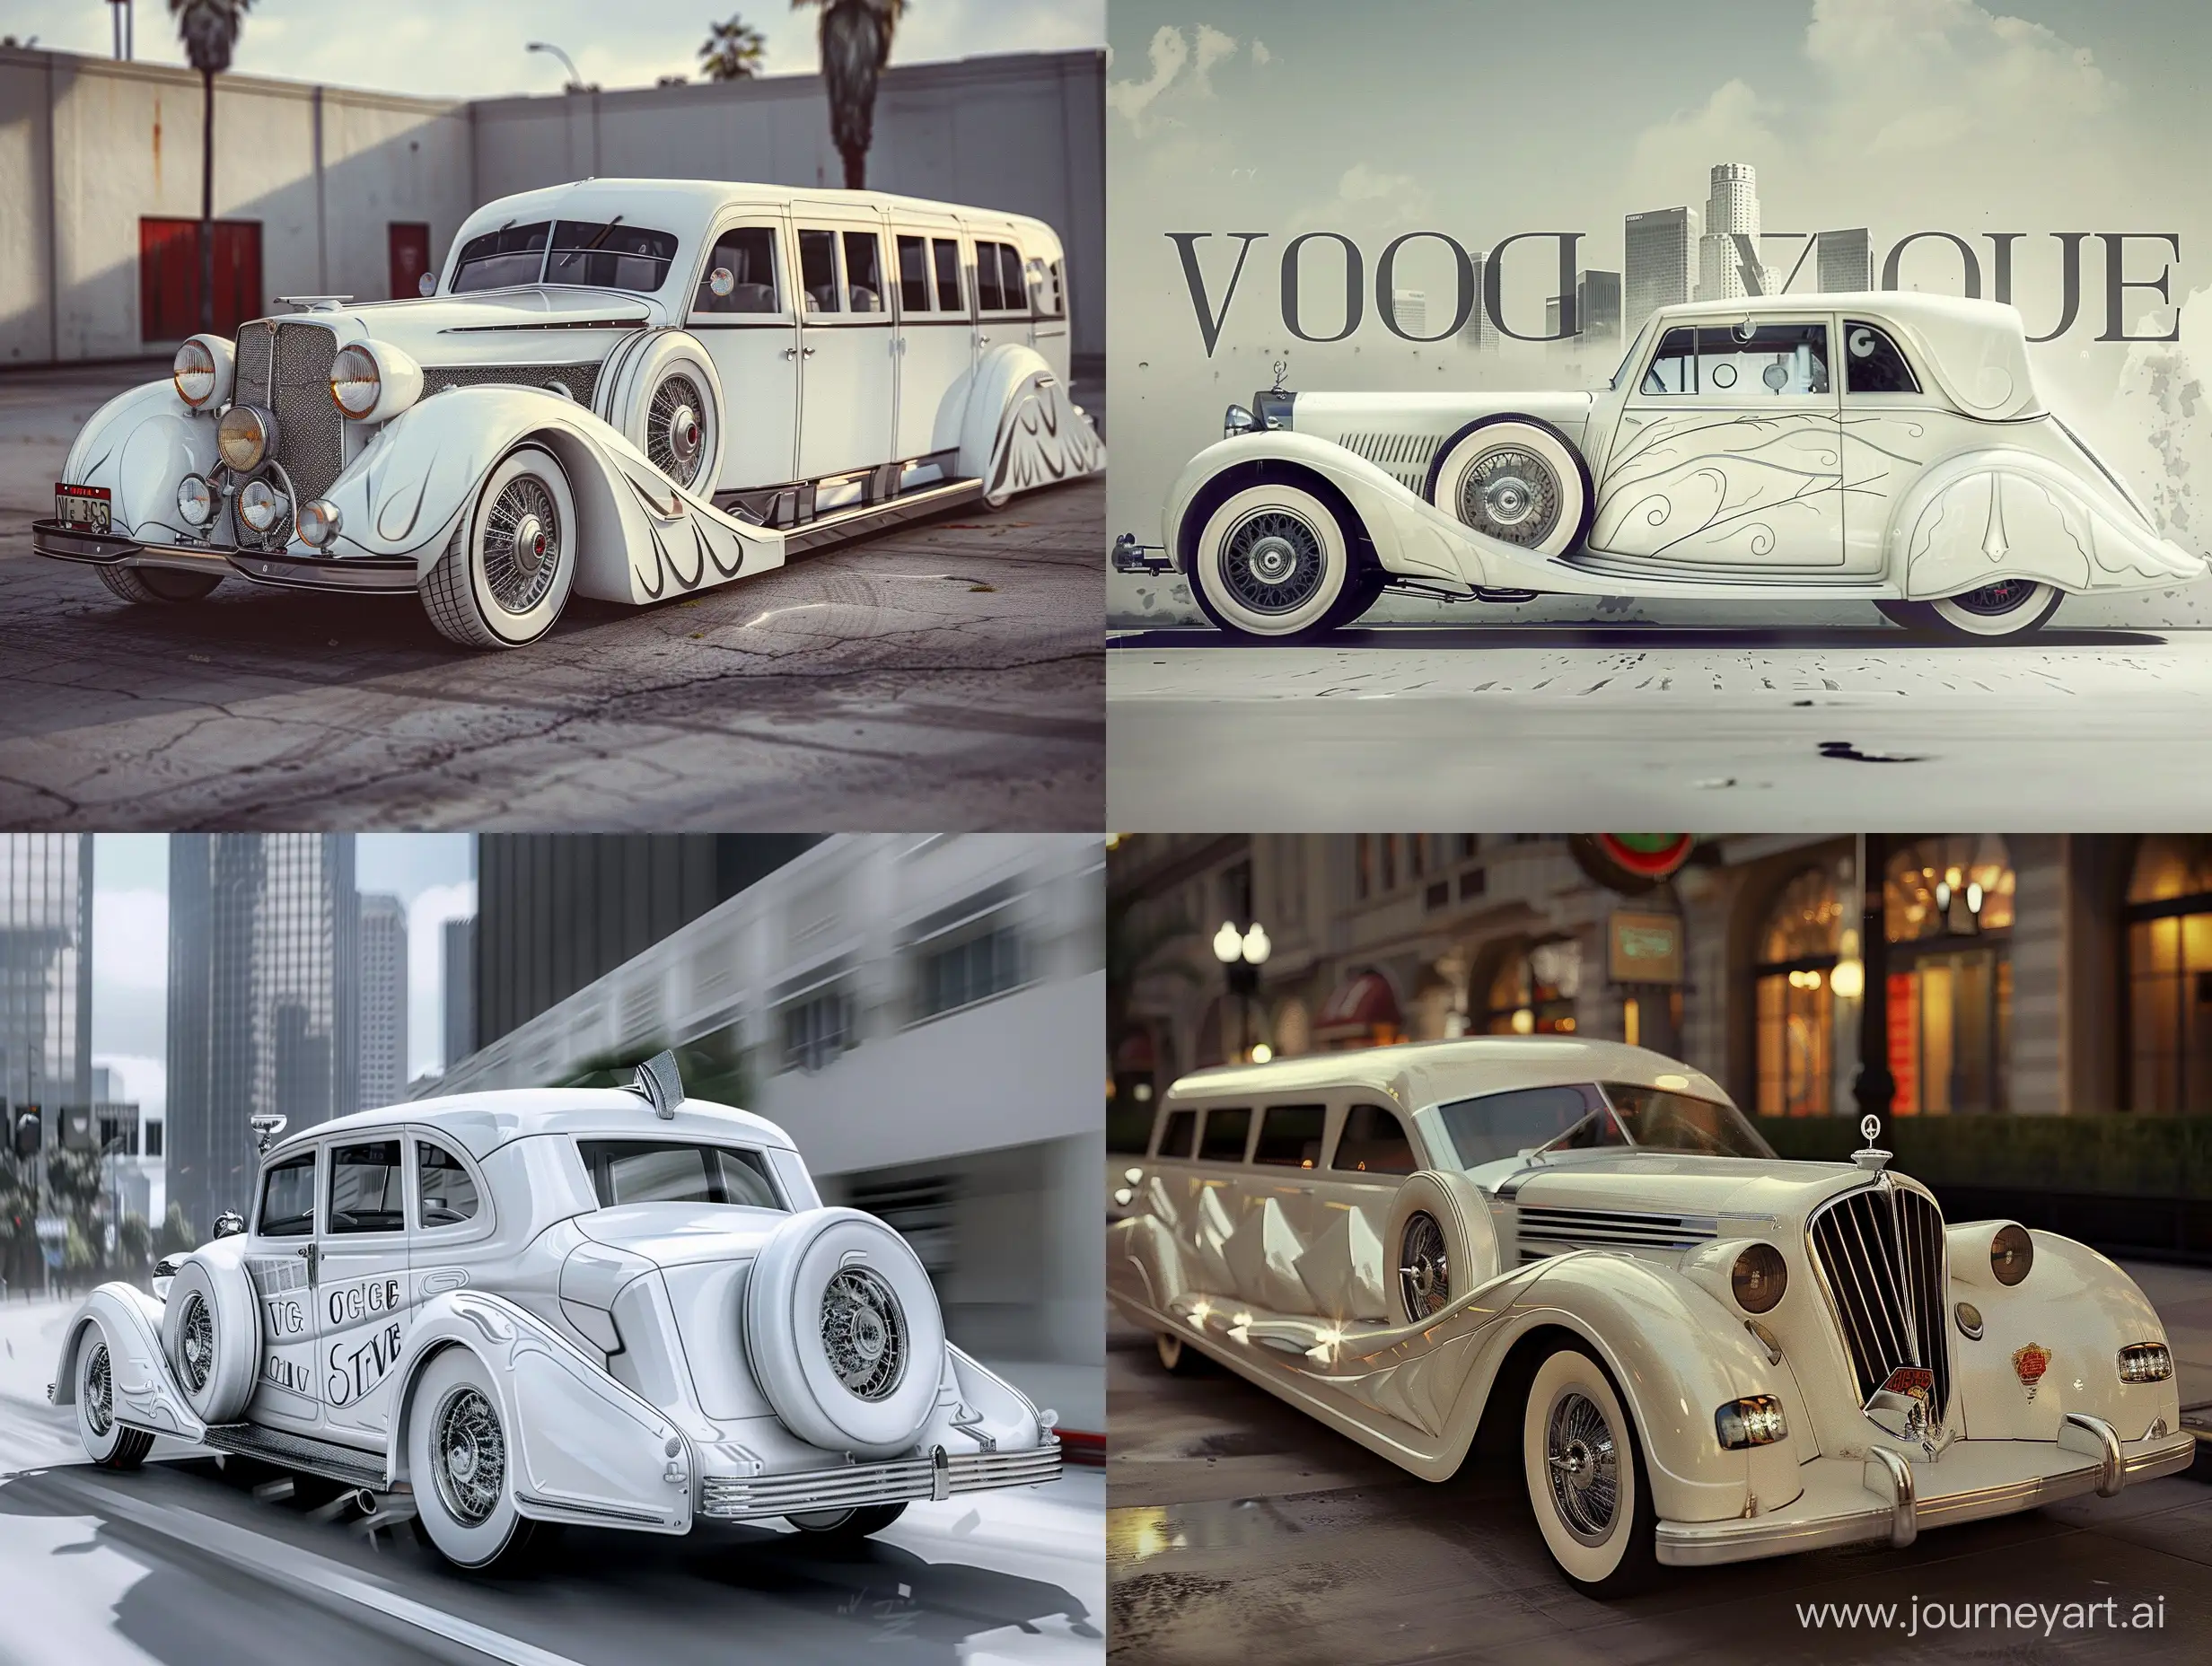 A 40s car with Vogue design, detailed, realistic, photorealistic, real, 30s design and ergonomics, white car, detailed, old, classic, retro, indie, Vogue style, Vogue effect, Los Angeles background, model Limousine, 40s style, 40s look, 30s effect